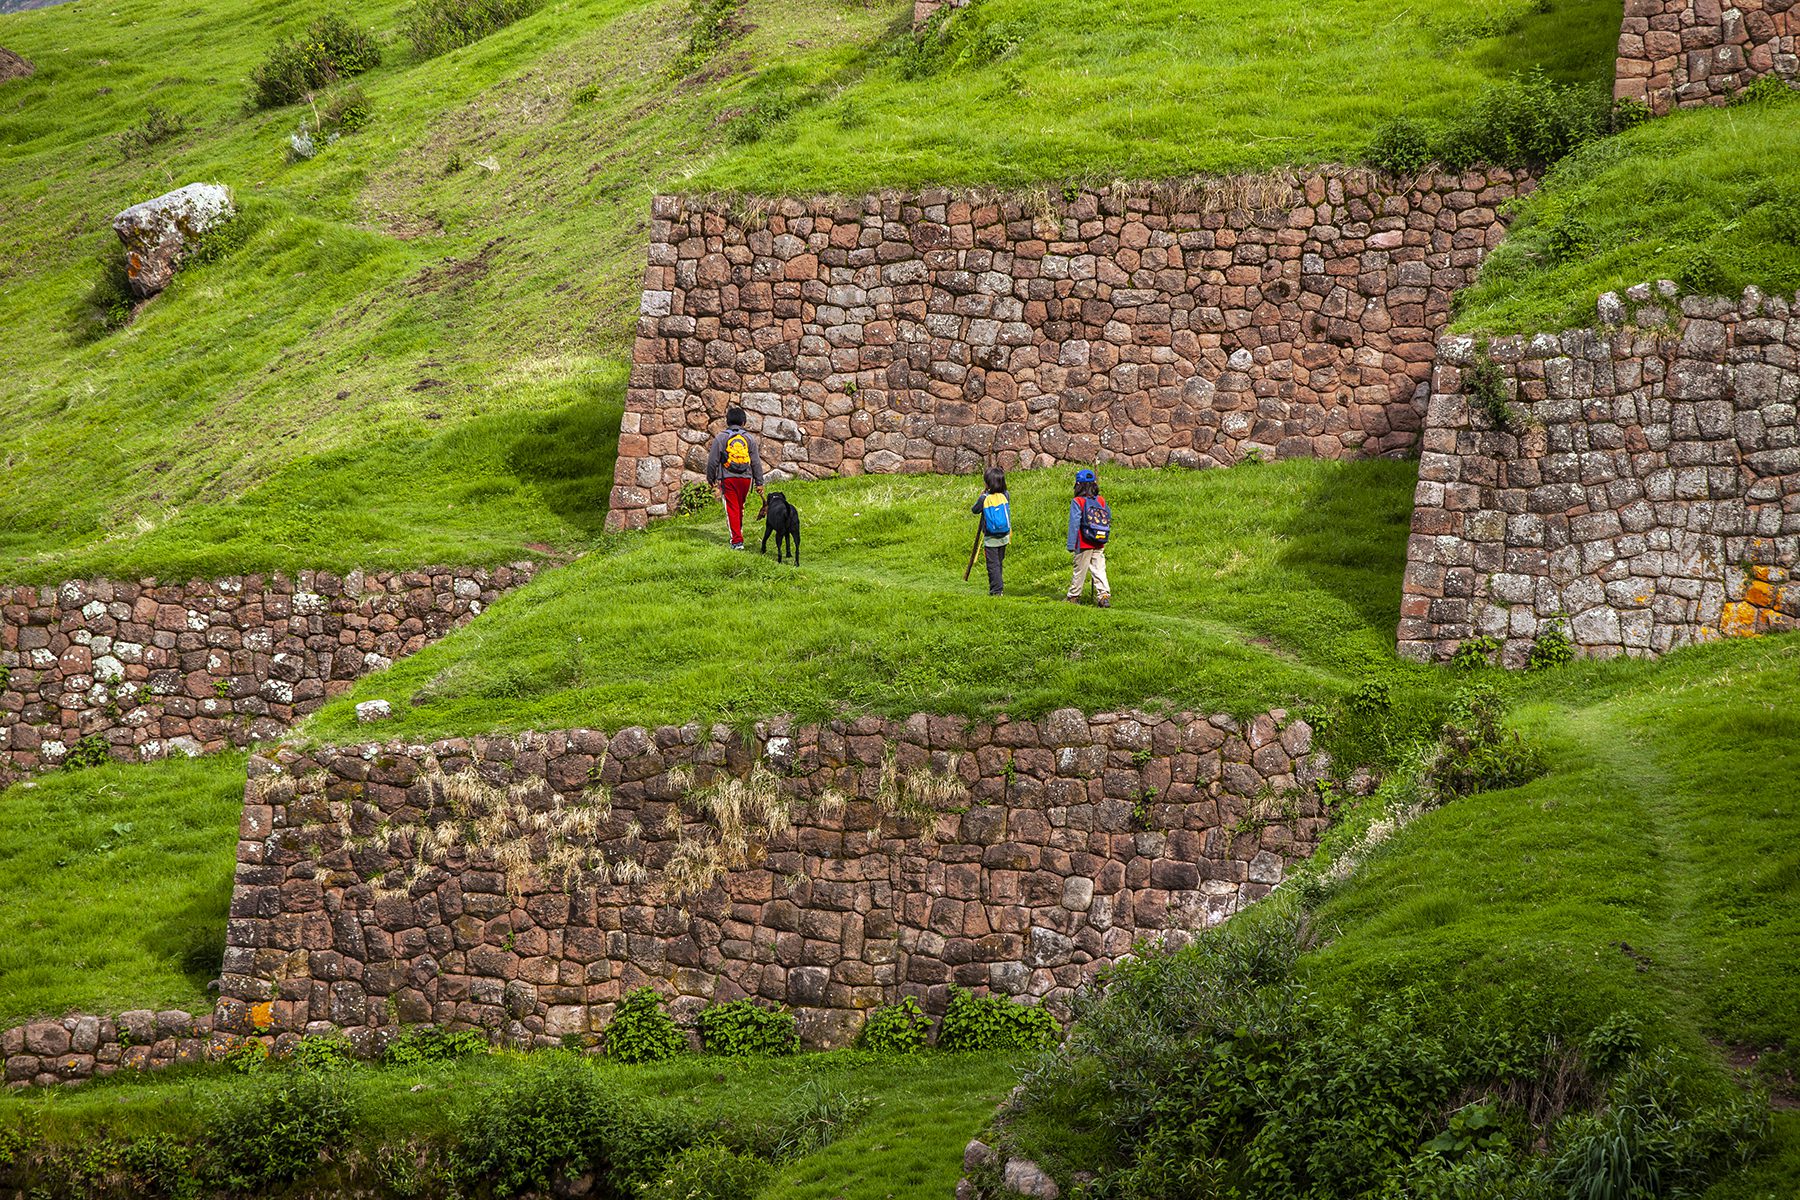 11Nice family playing on the Inca terraces of Huchuy Qoso | Responsible Travel Peru